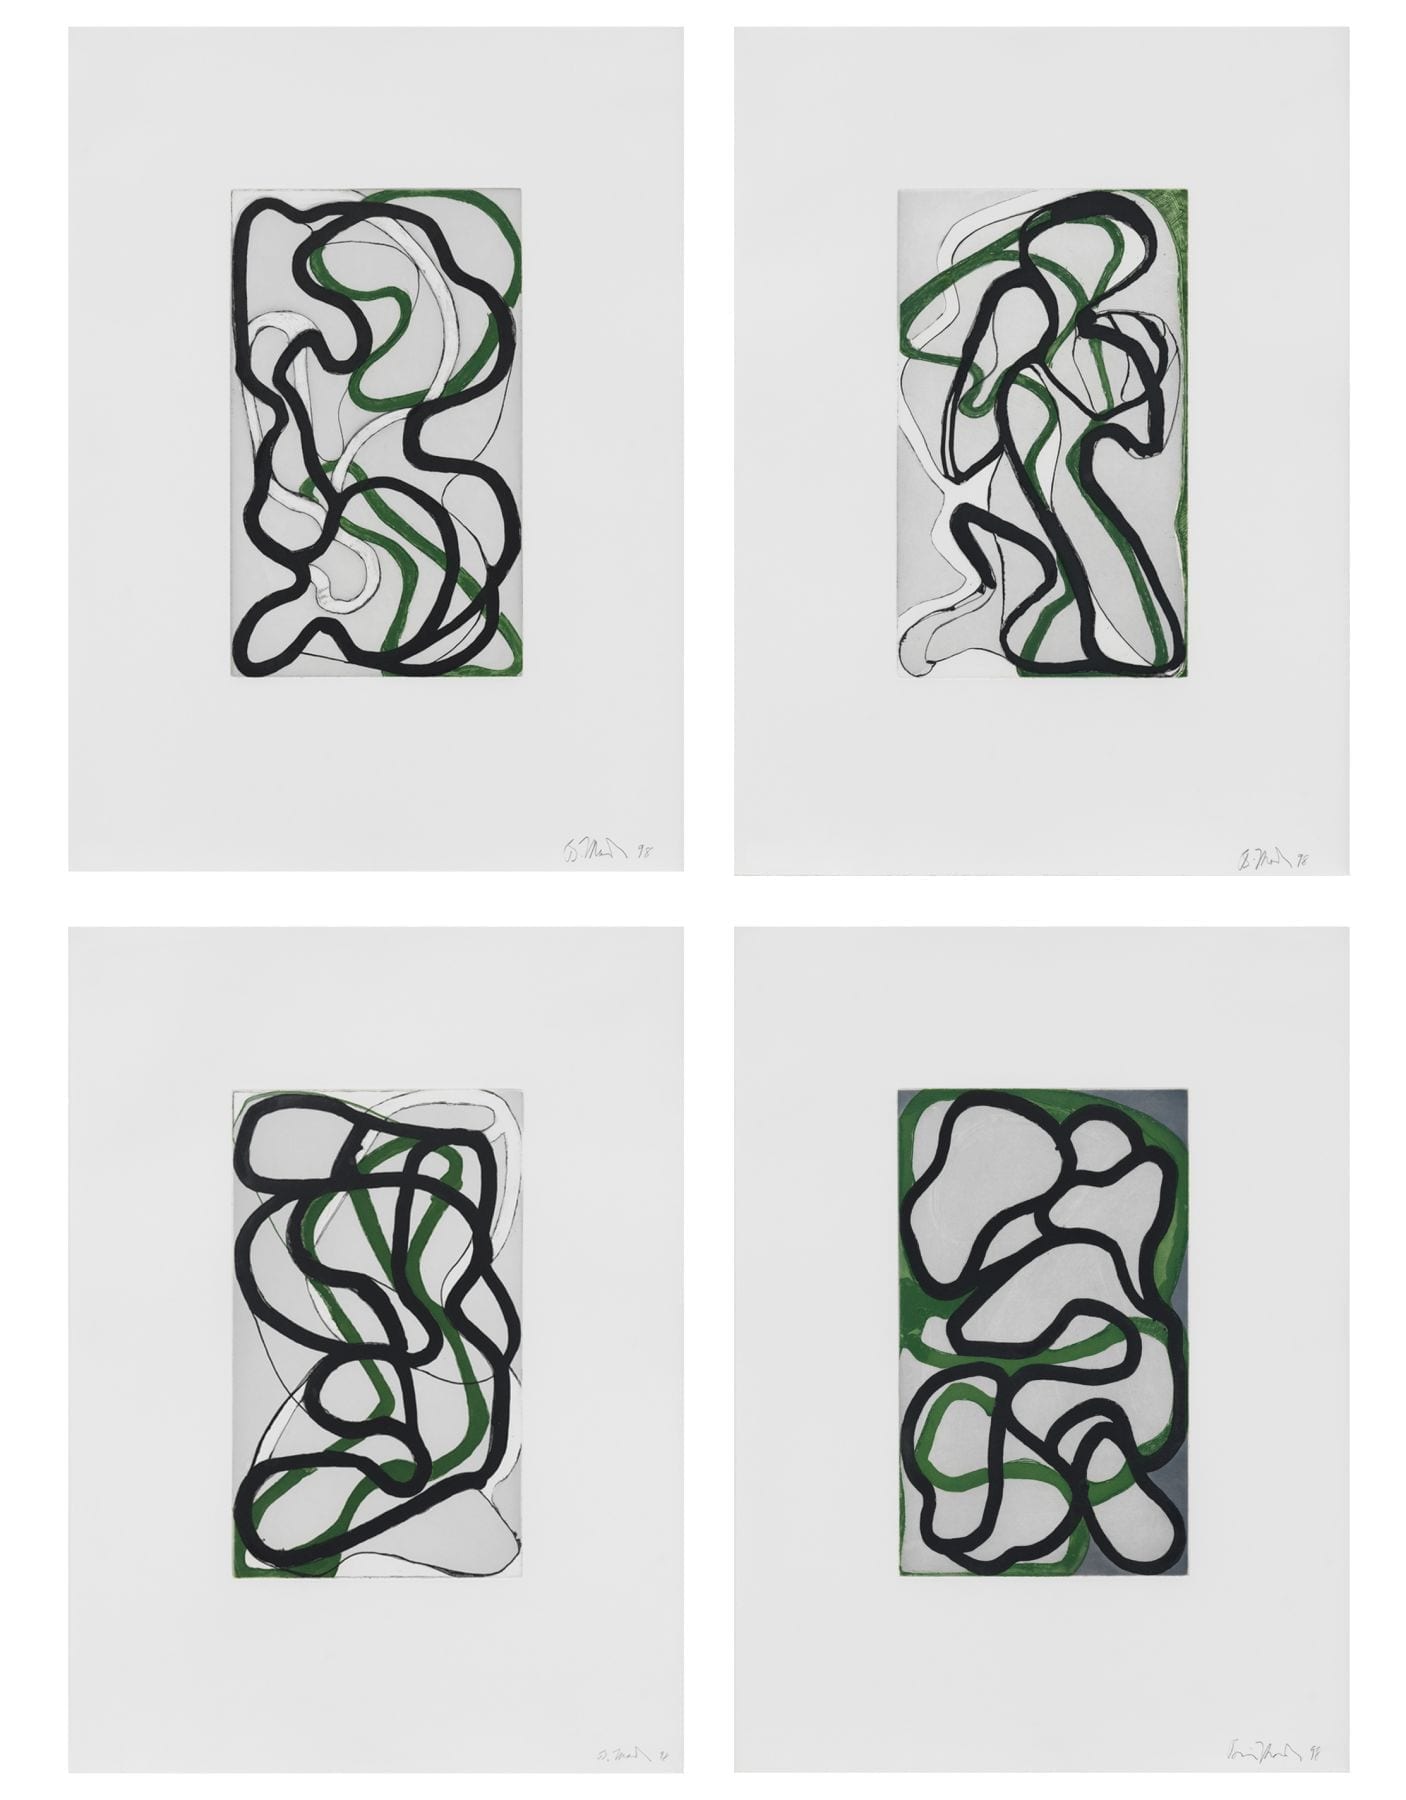 Suzhou I-IV, 1998, The complete set of four etchings with aquatint, drypoint, and scraping in colors by Brice Marden